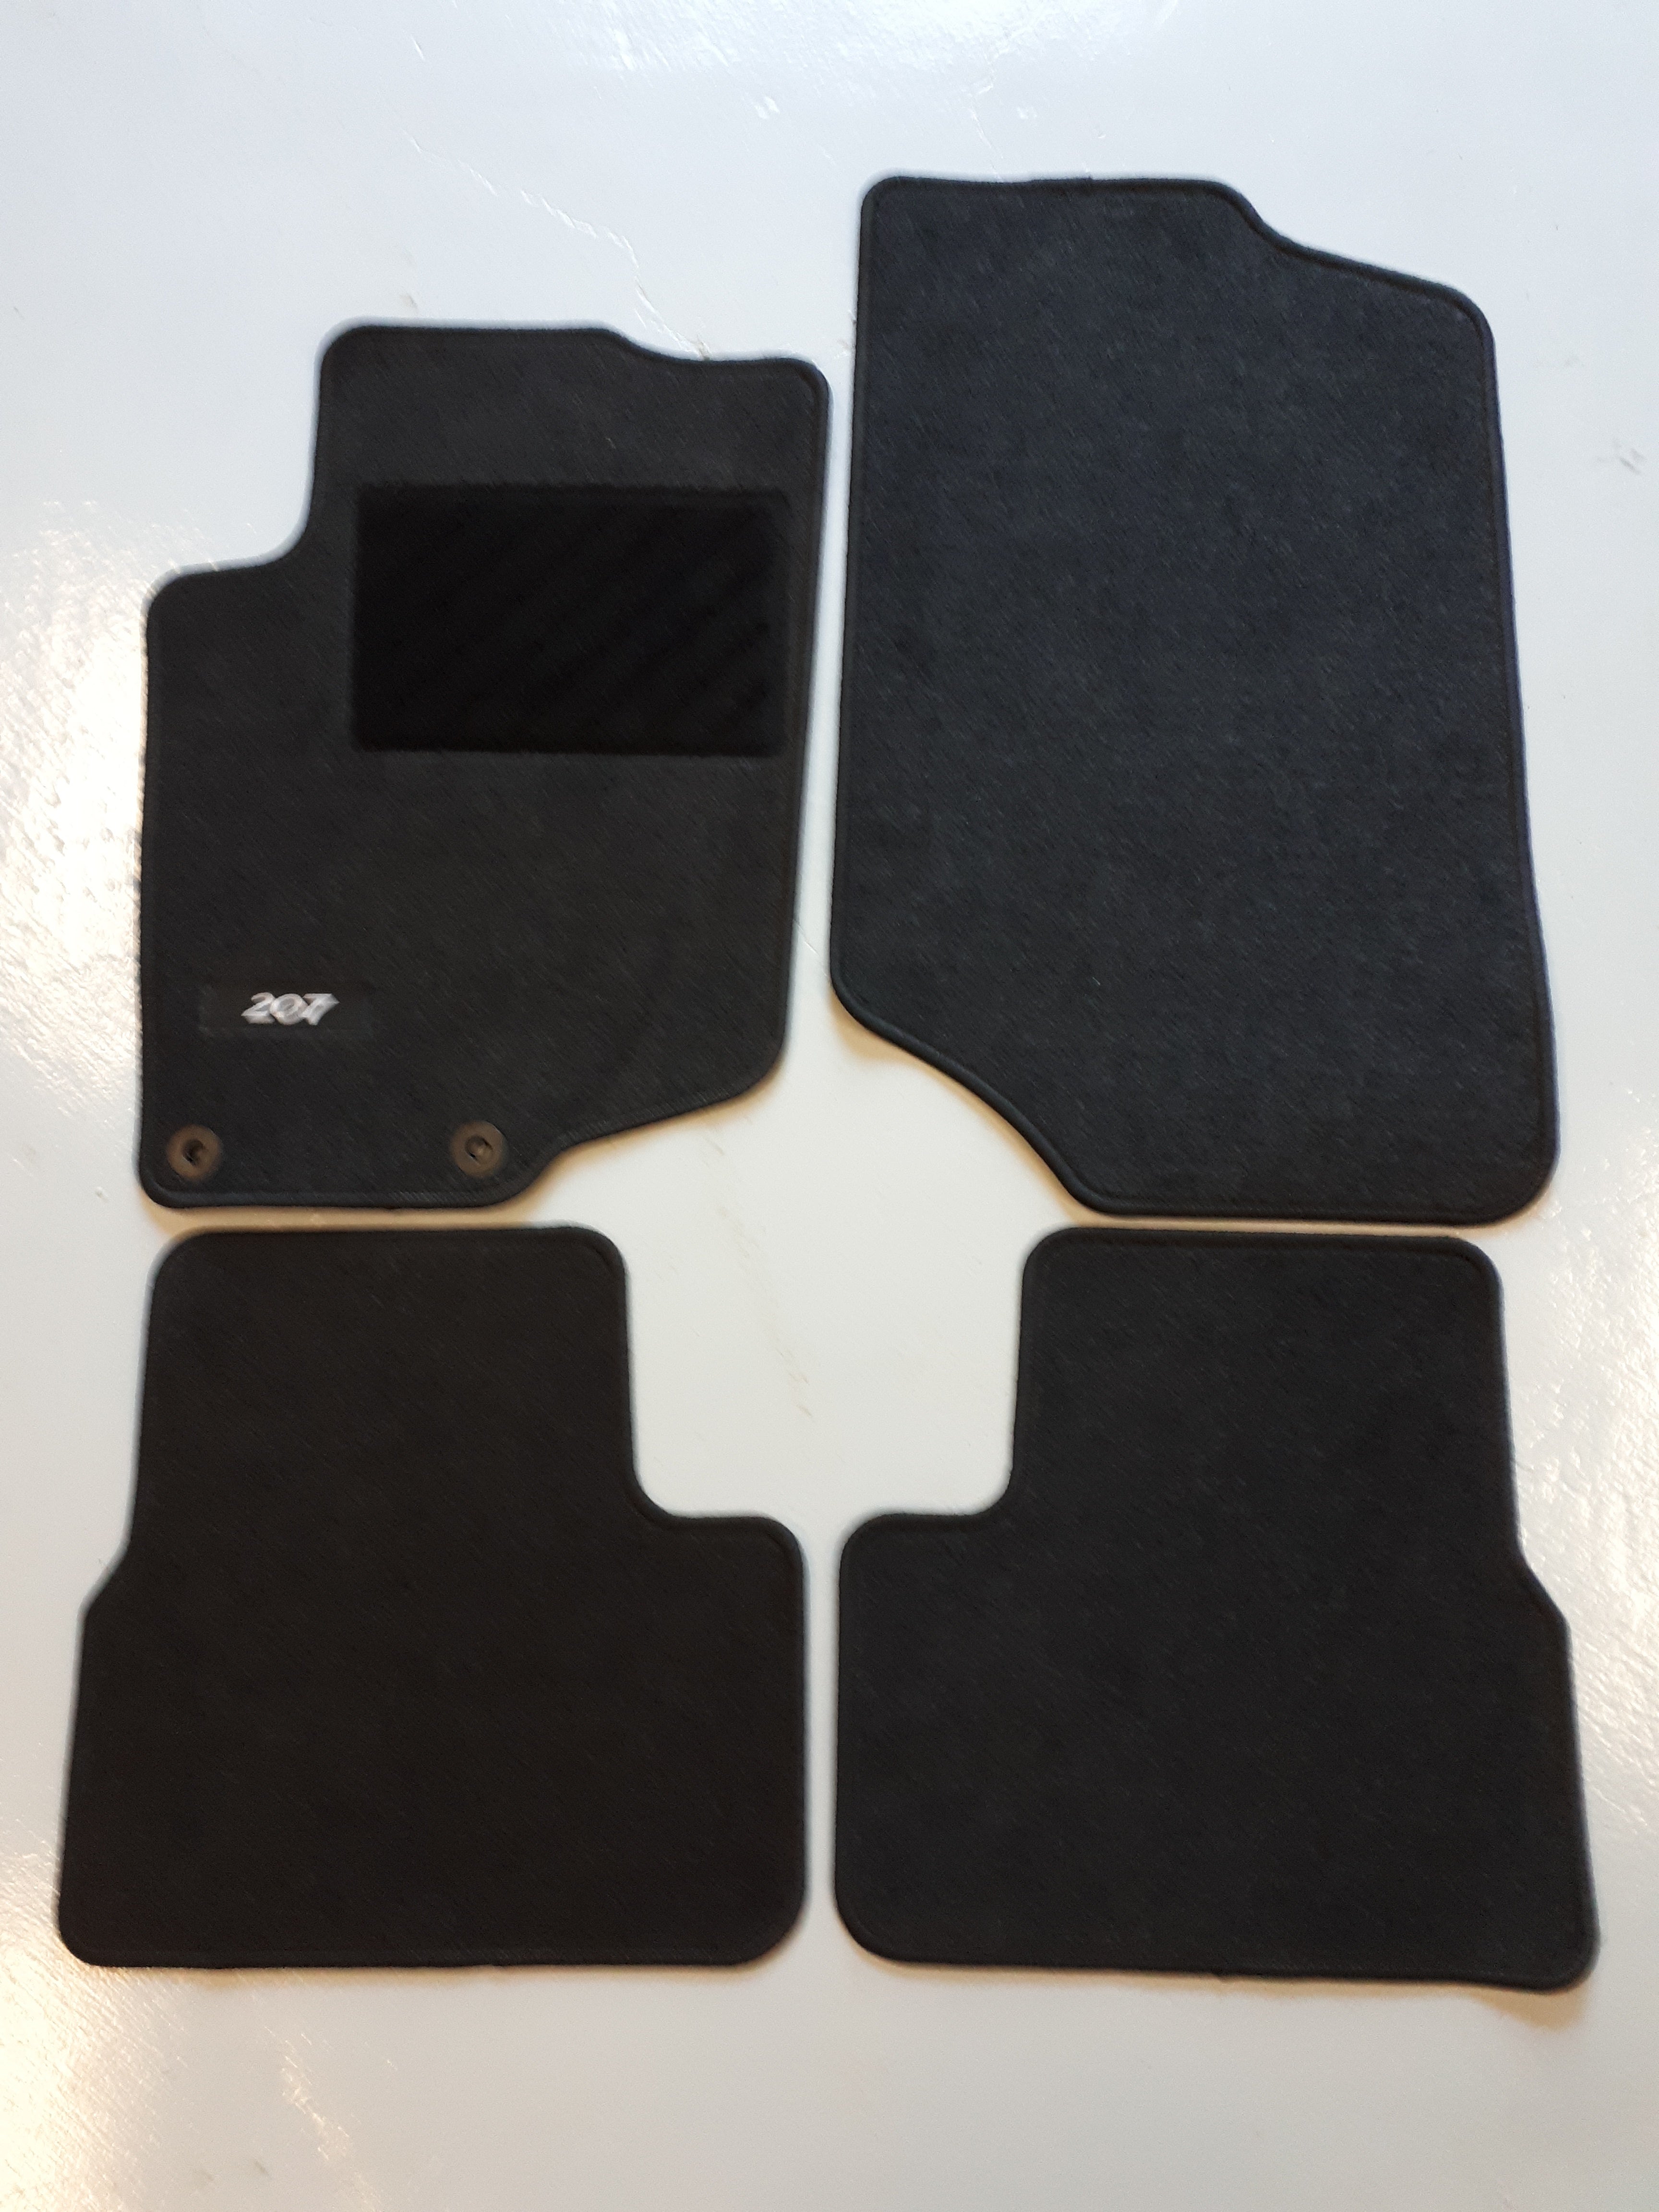 textile Set – 207 4 MLBMOTOR SW 207 Peugeot of and 2006-2015) floor mats O (years